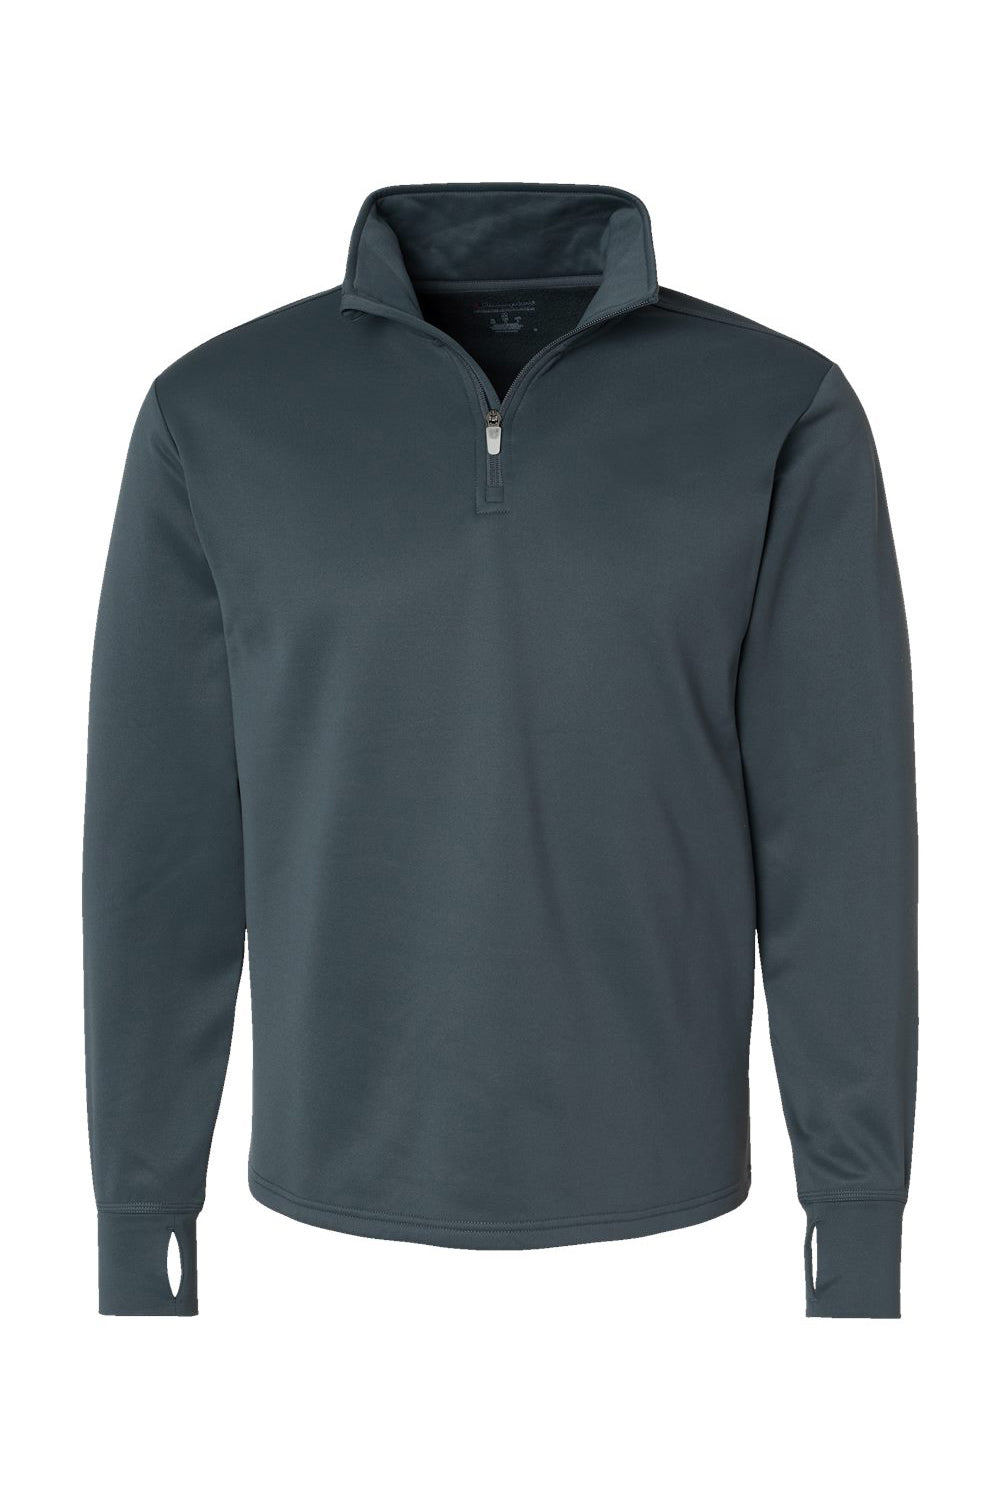 Champion CHP190 Mens Sport 1/4 Zip Pullover Stealth Grey Flat Front